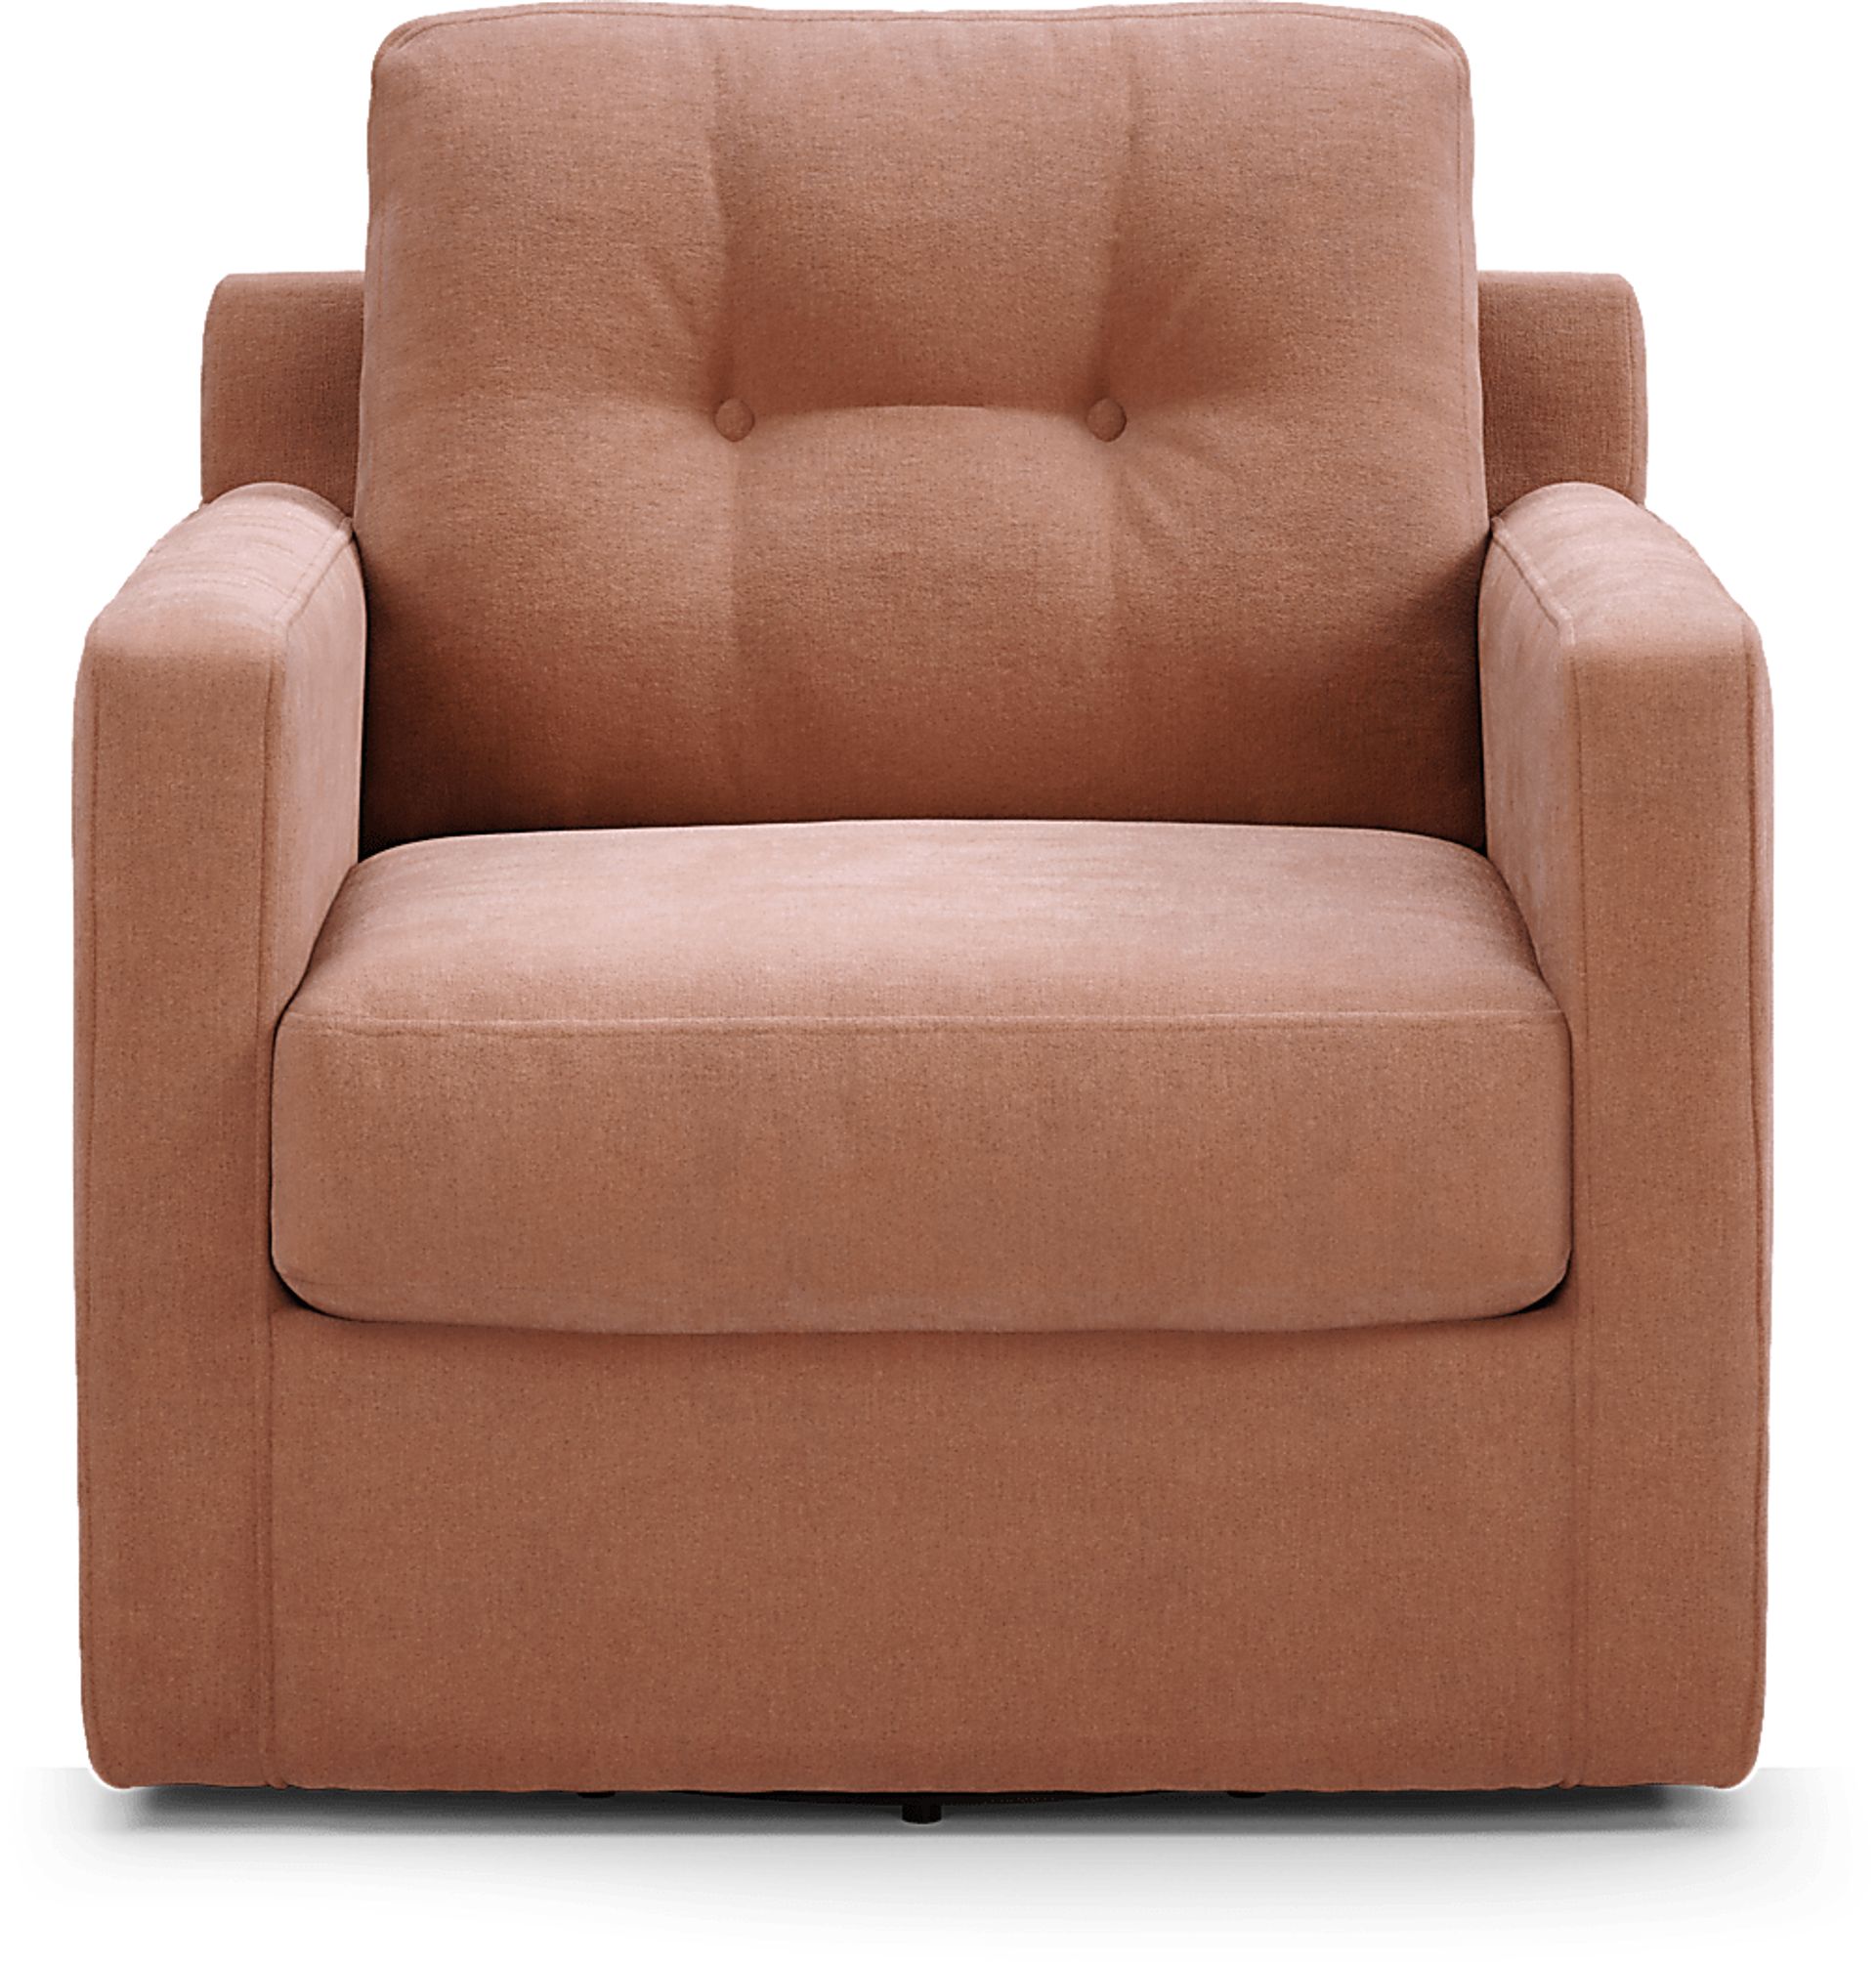 Drew Small Leather Swivel Accent Chair + Reviews